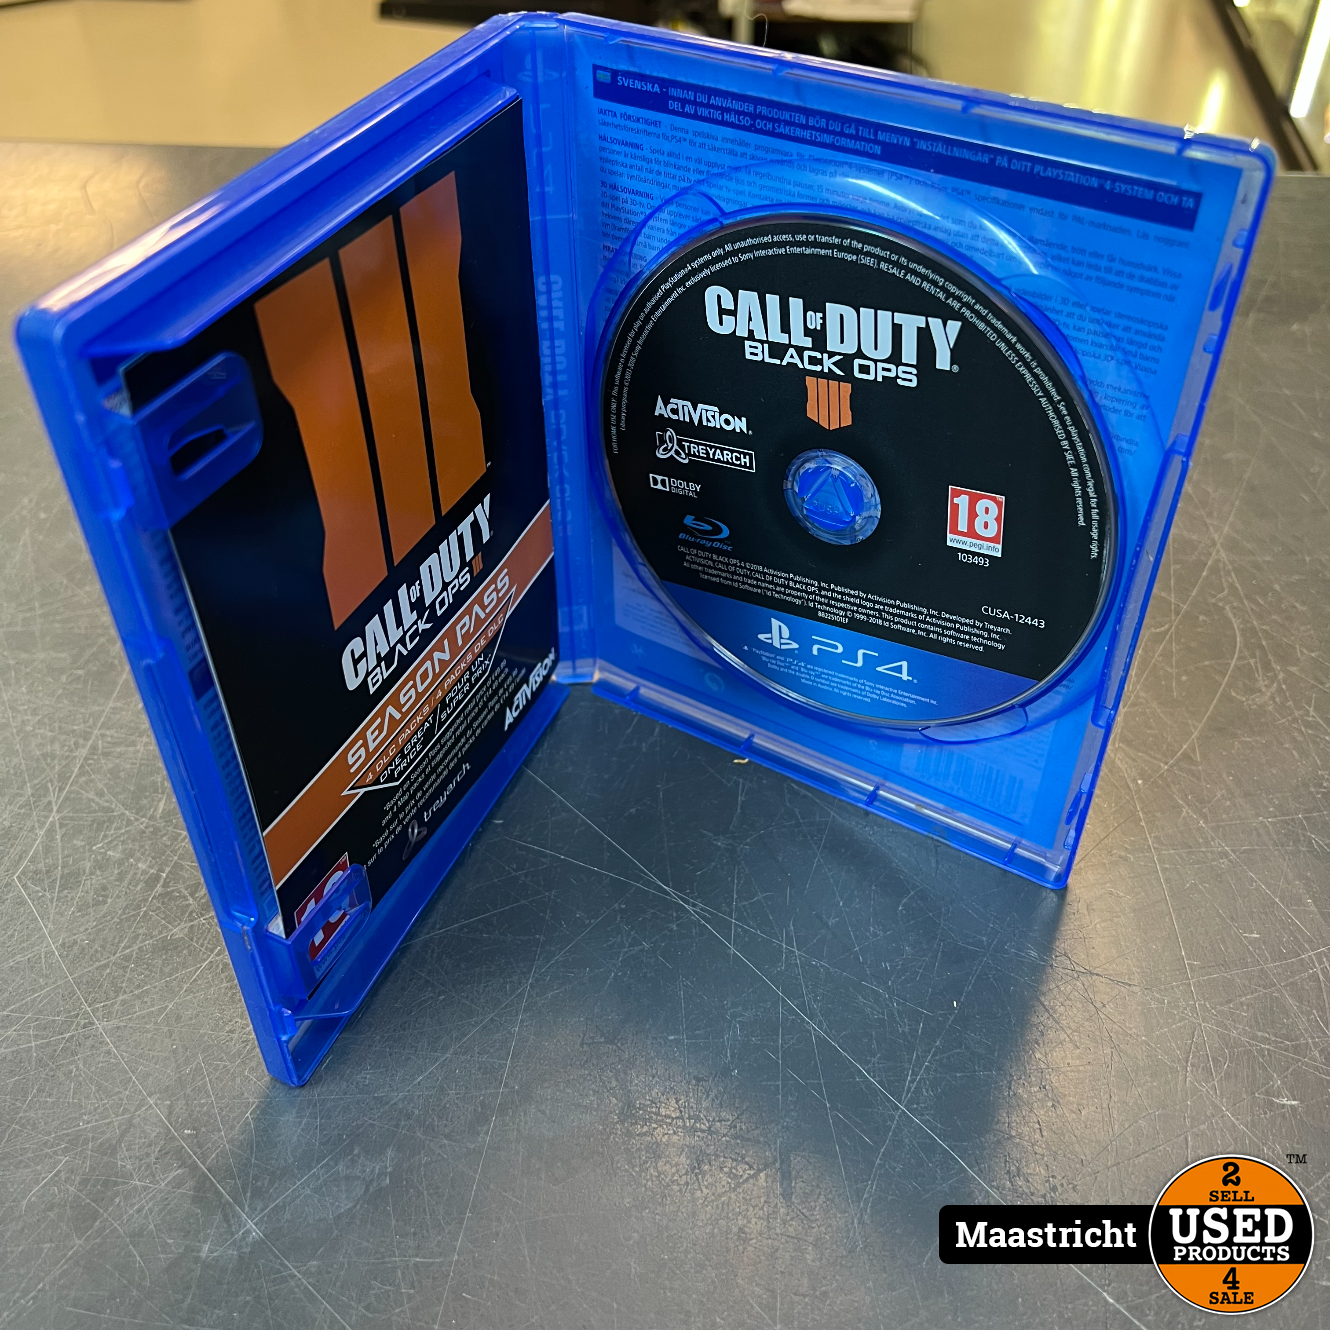 accu Melodieus Met andere woorden PS4 Game - COD Black Ops 3 - Used Products Maastricht